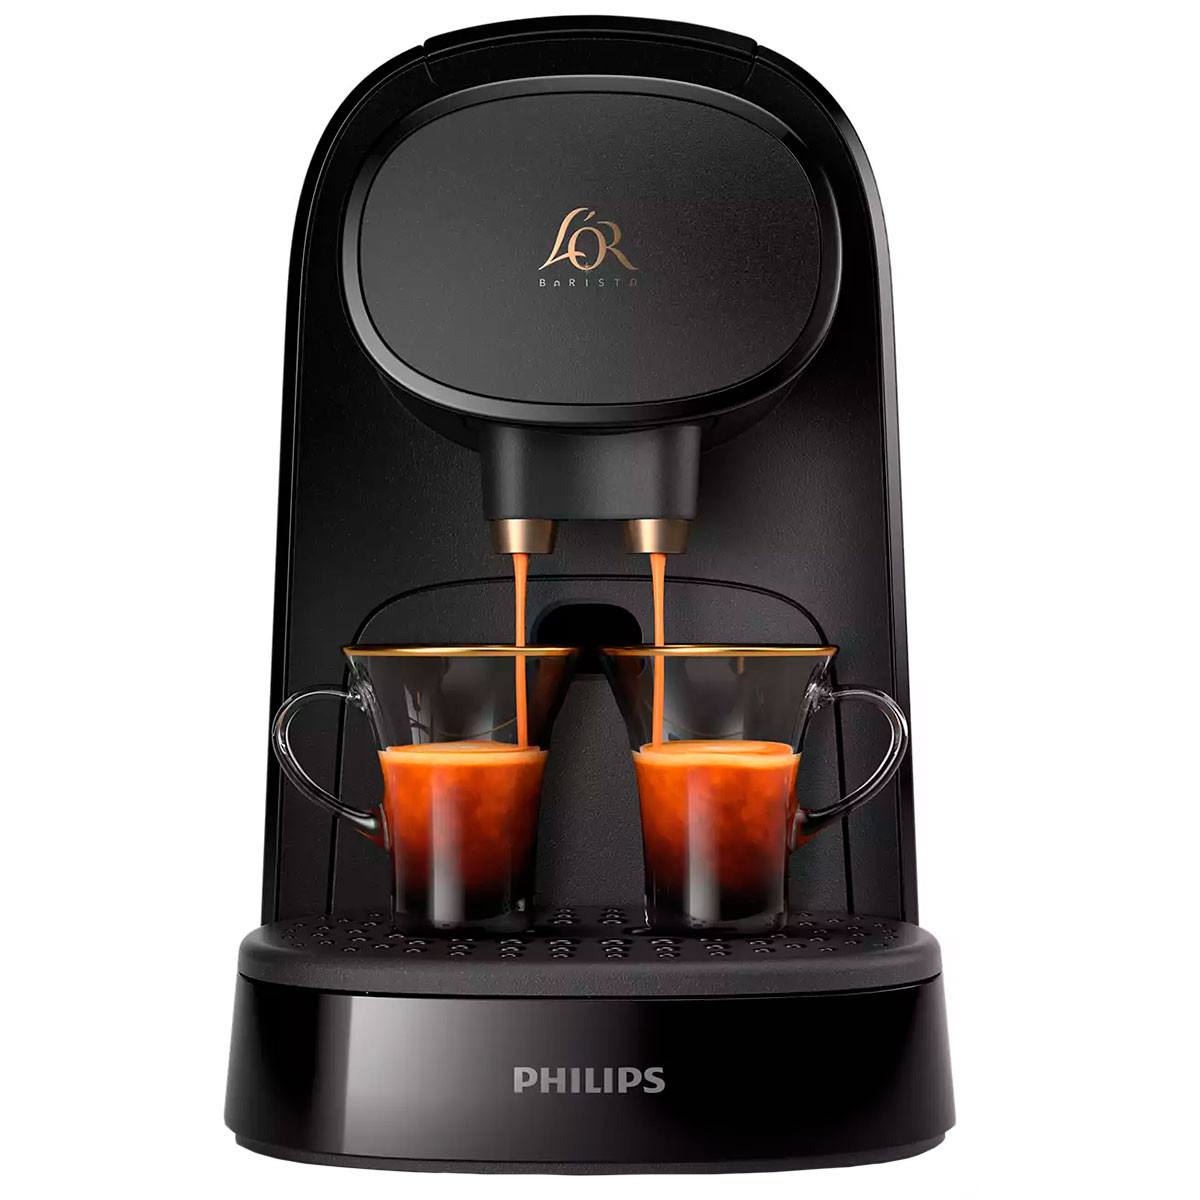 CAFETERA PHILIPS L'OR BARISTA LM8012/60